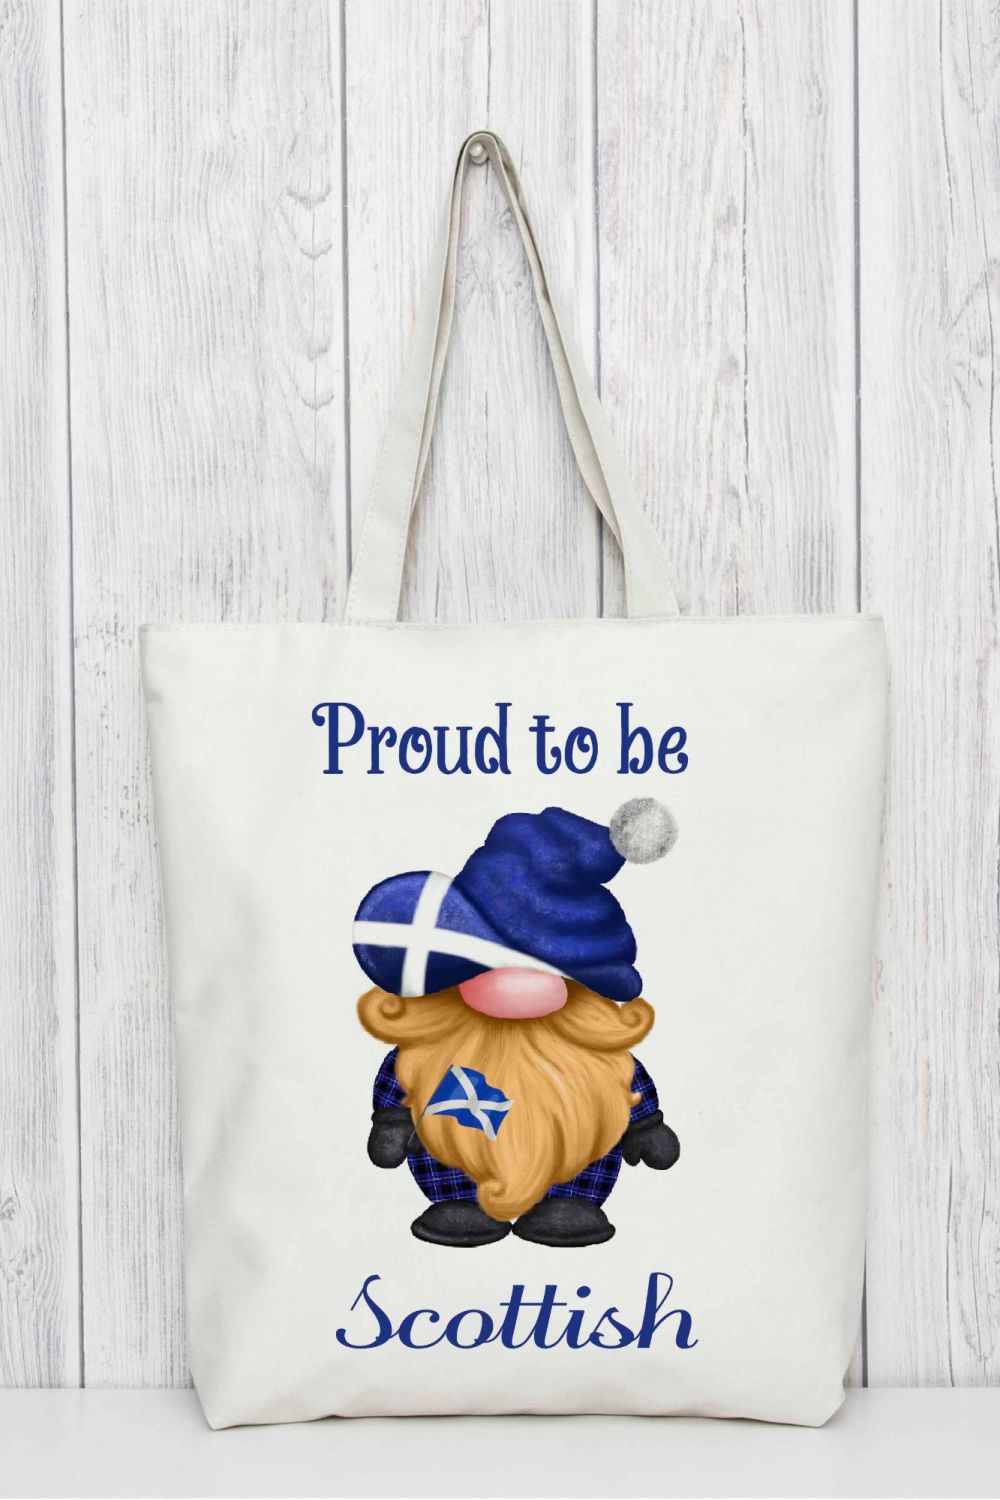 Proud to be Scottish Tote Bag - Scotland Bag for Life